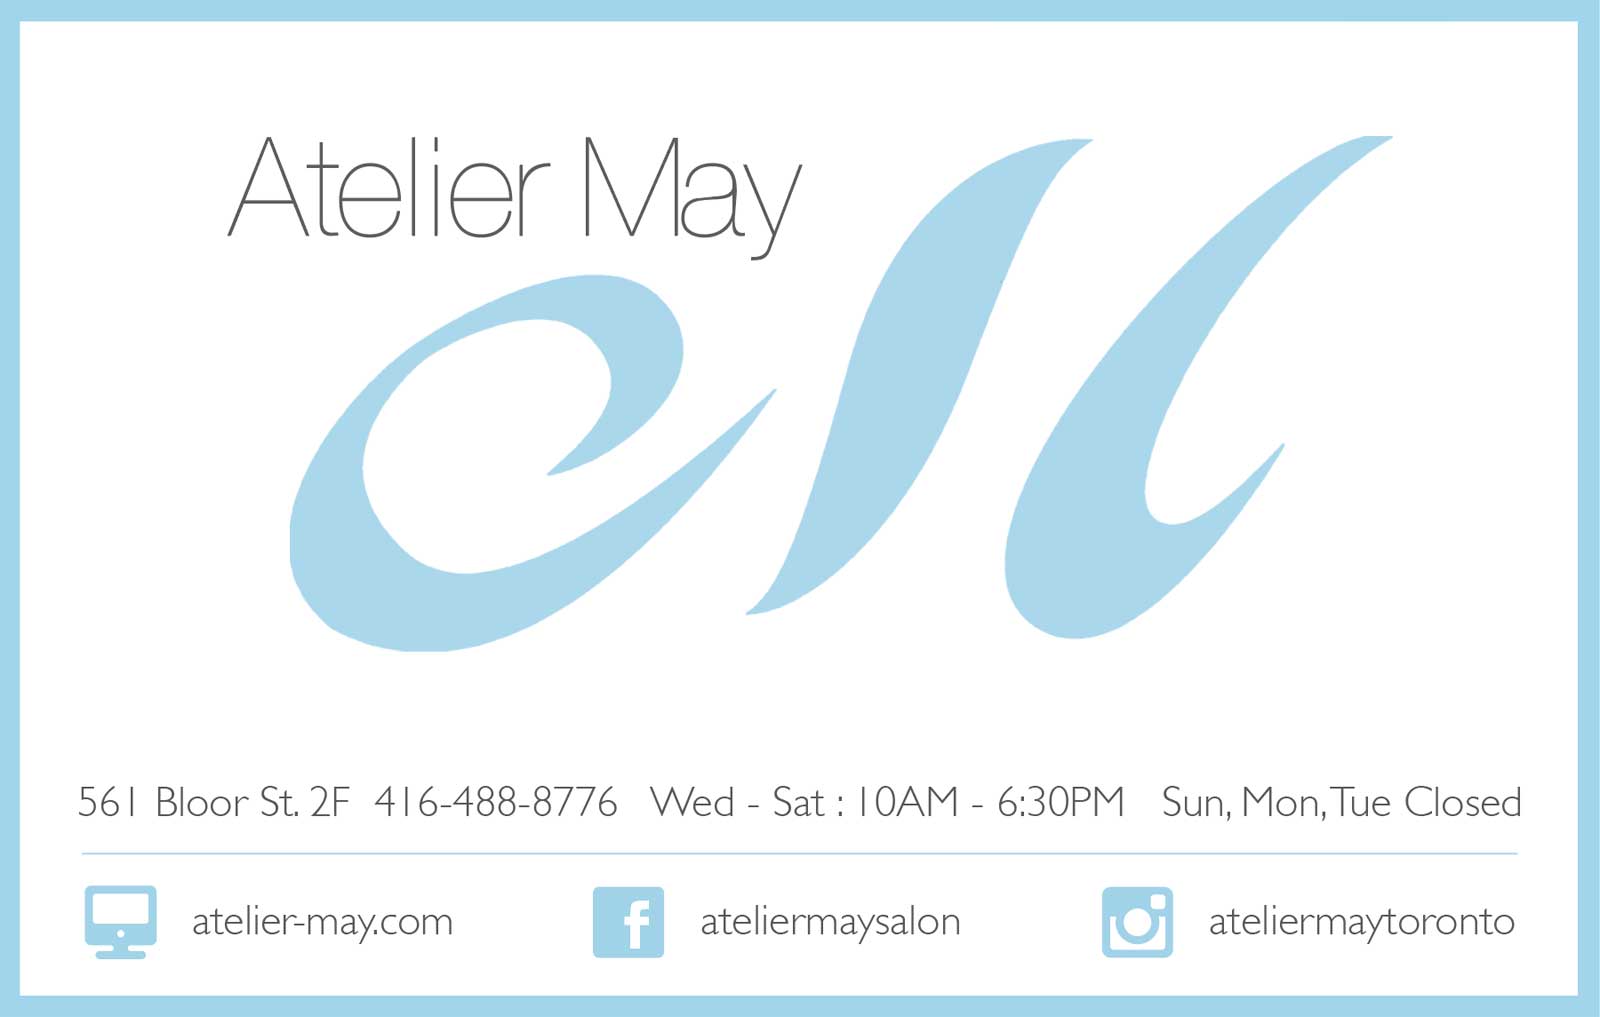 Atelier May